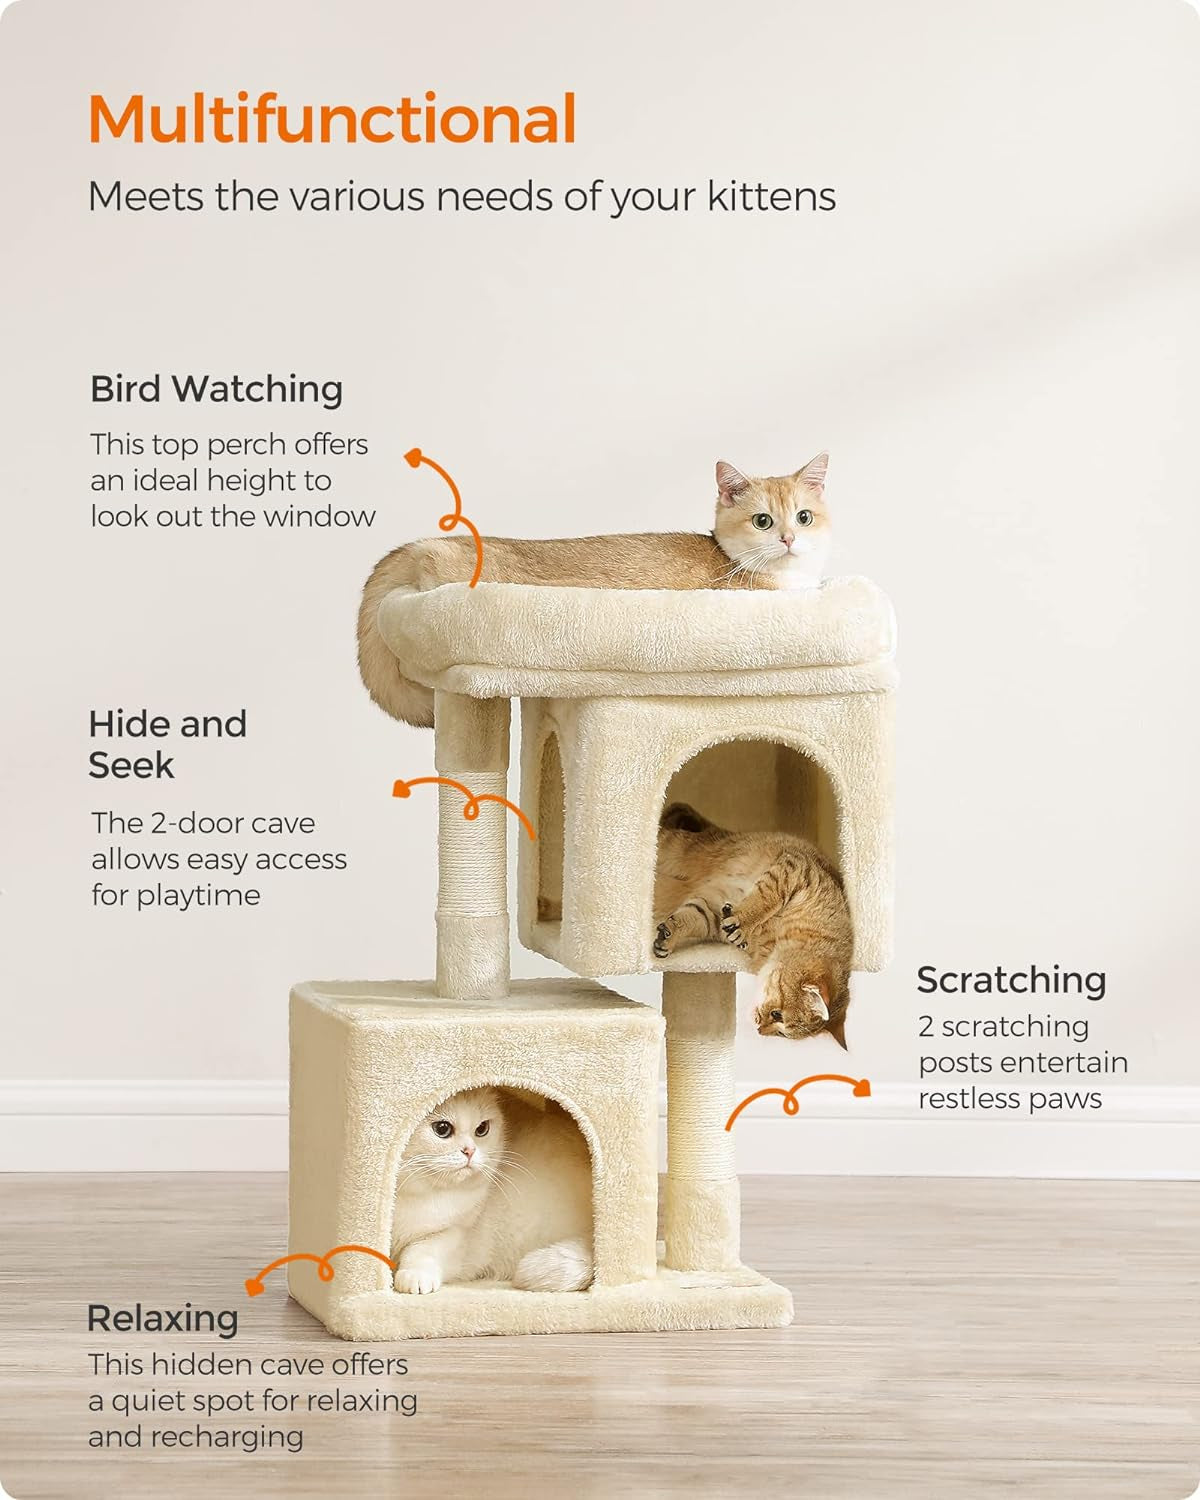 Cat Tree, 26.4-Inch Cat Tower, S, Cat Condo for Kittens up to 7 Lb, Large Cat Perch, 2 Cat Caves, Scratching Post, Beige UPCT611M01